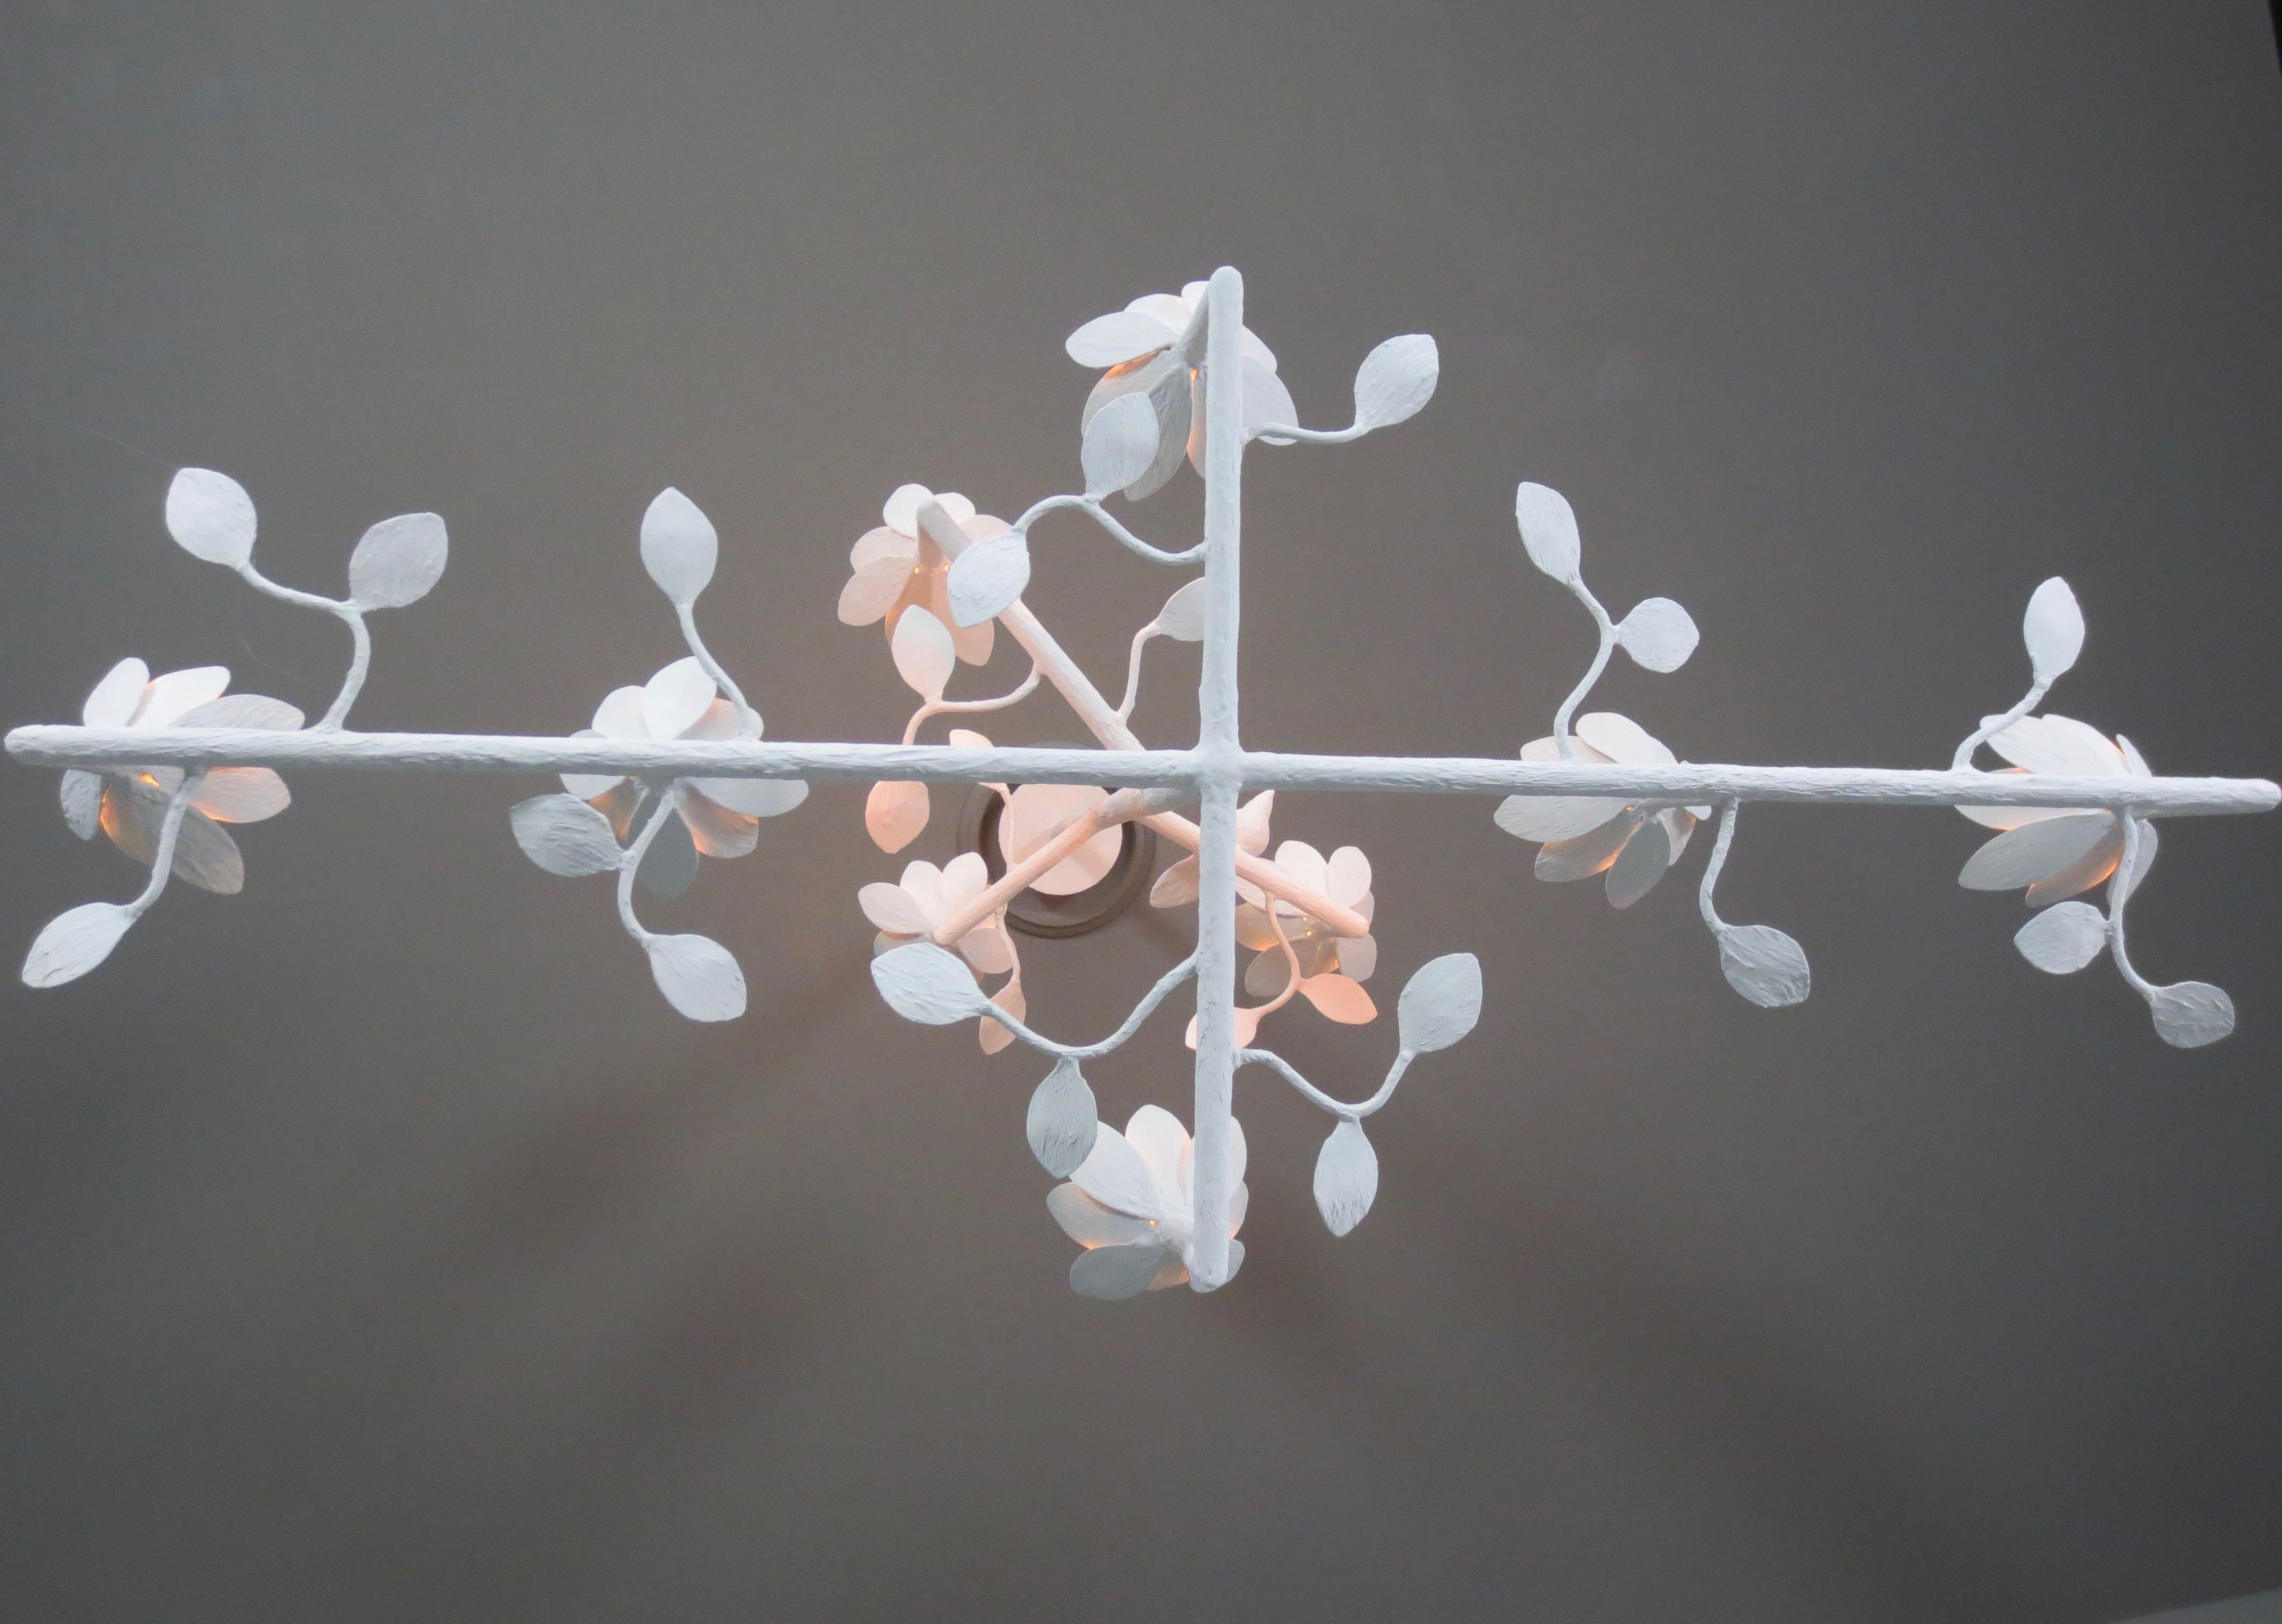 9 bloom cross bar plaster chandelier with birds and leaves by Tracey Garet of Apsara Interiors.
This chandelier has 9 blooms of various heights and is shown in white plaster. A single bird adorns one of the cross bars and leaves are detailed